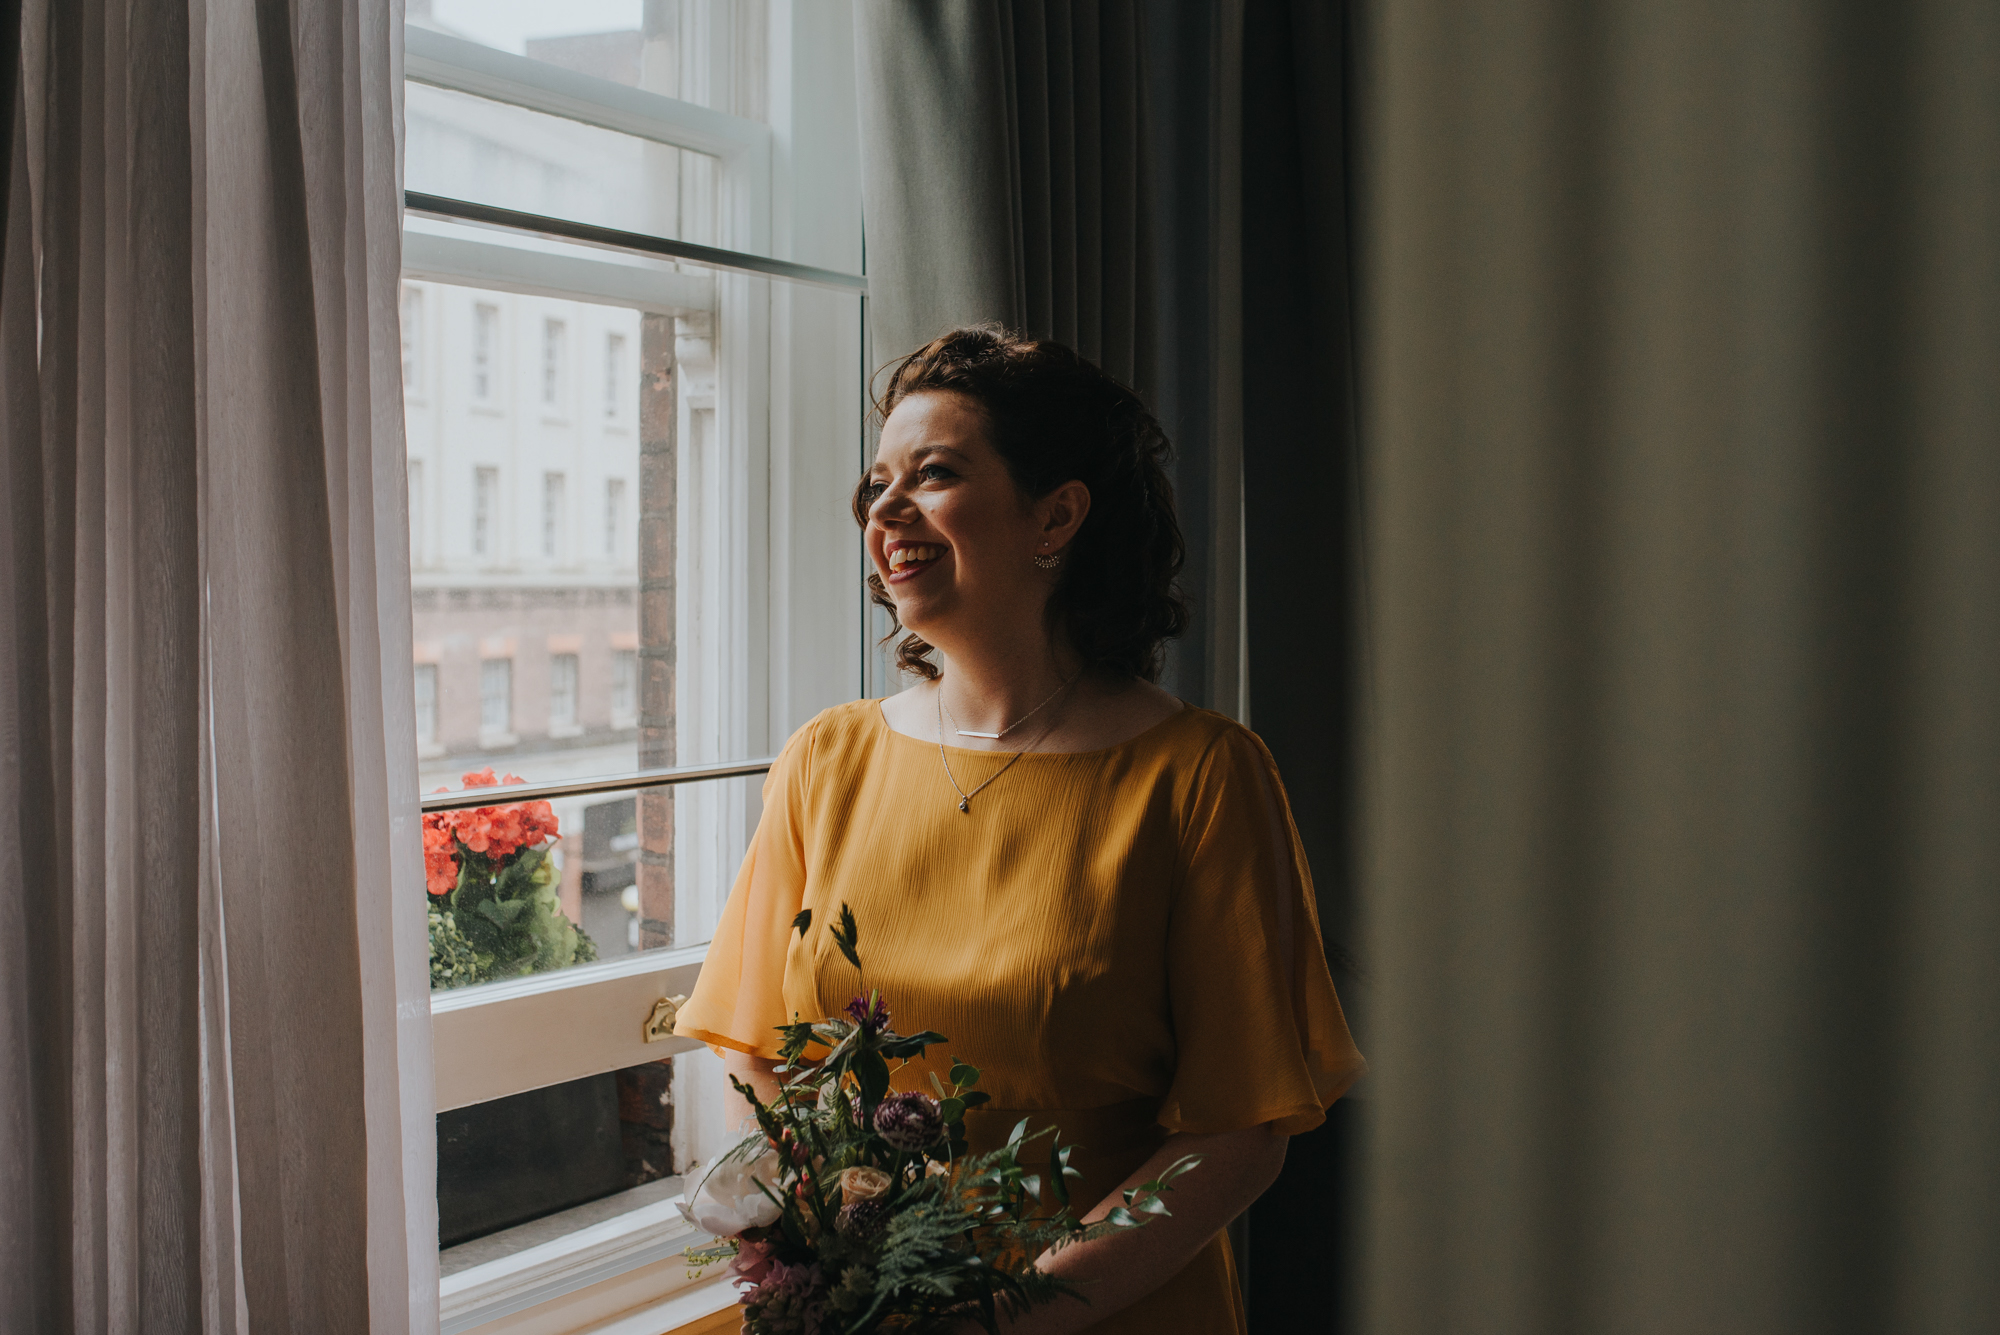 Bride in a yellow wedding dress looking out of a window